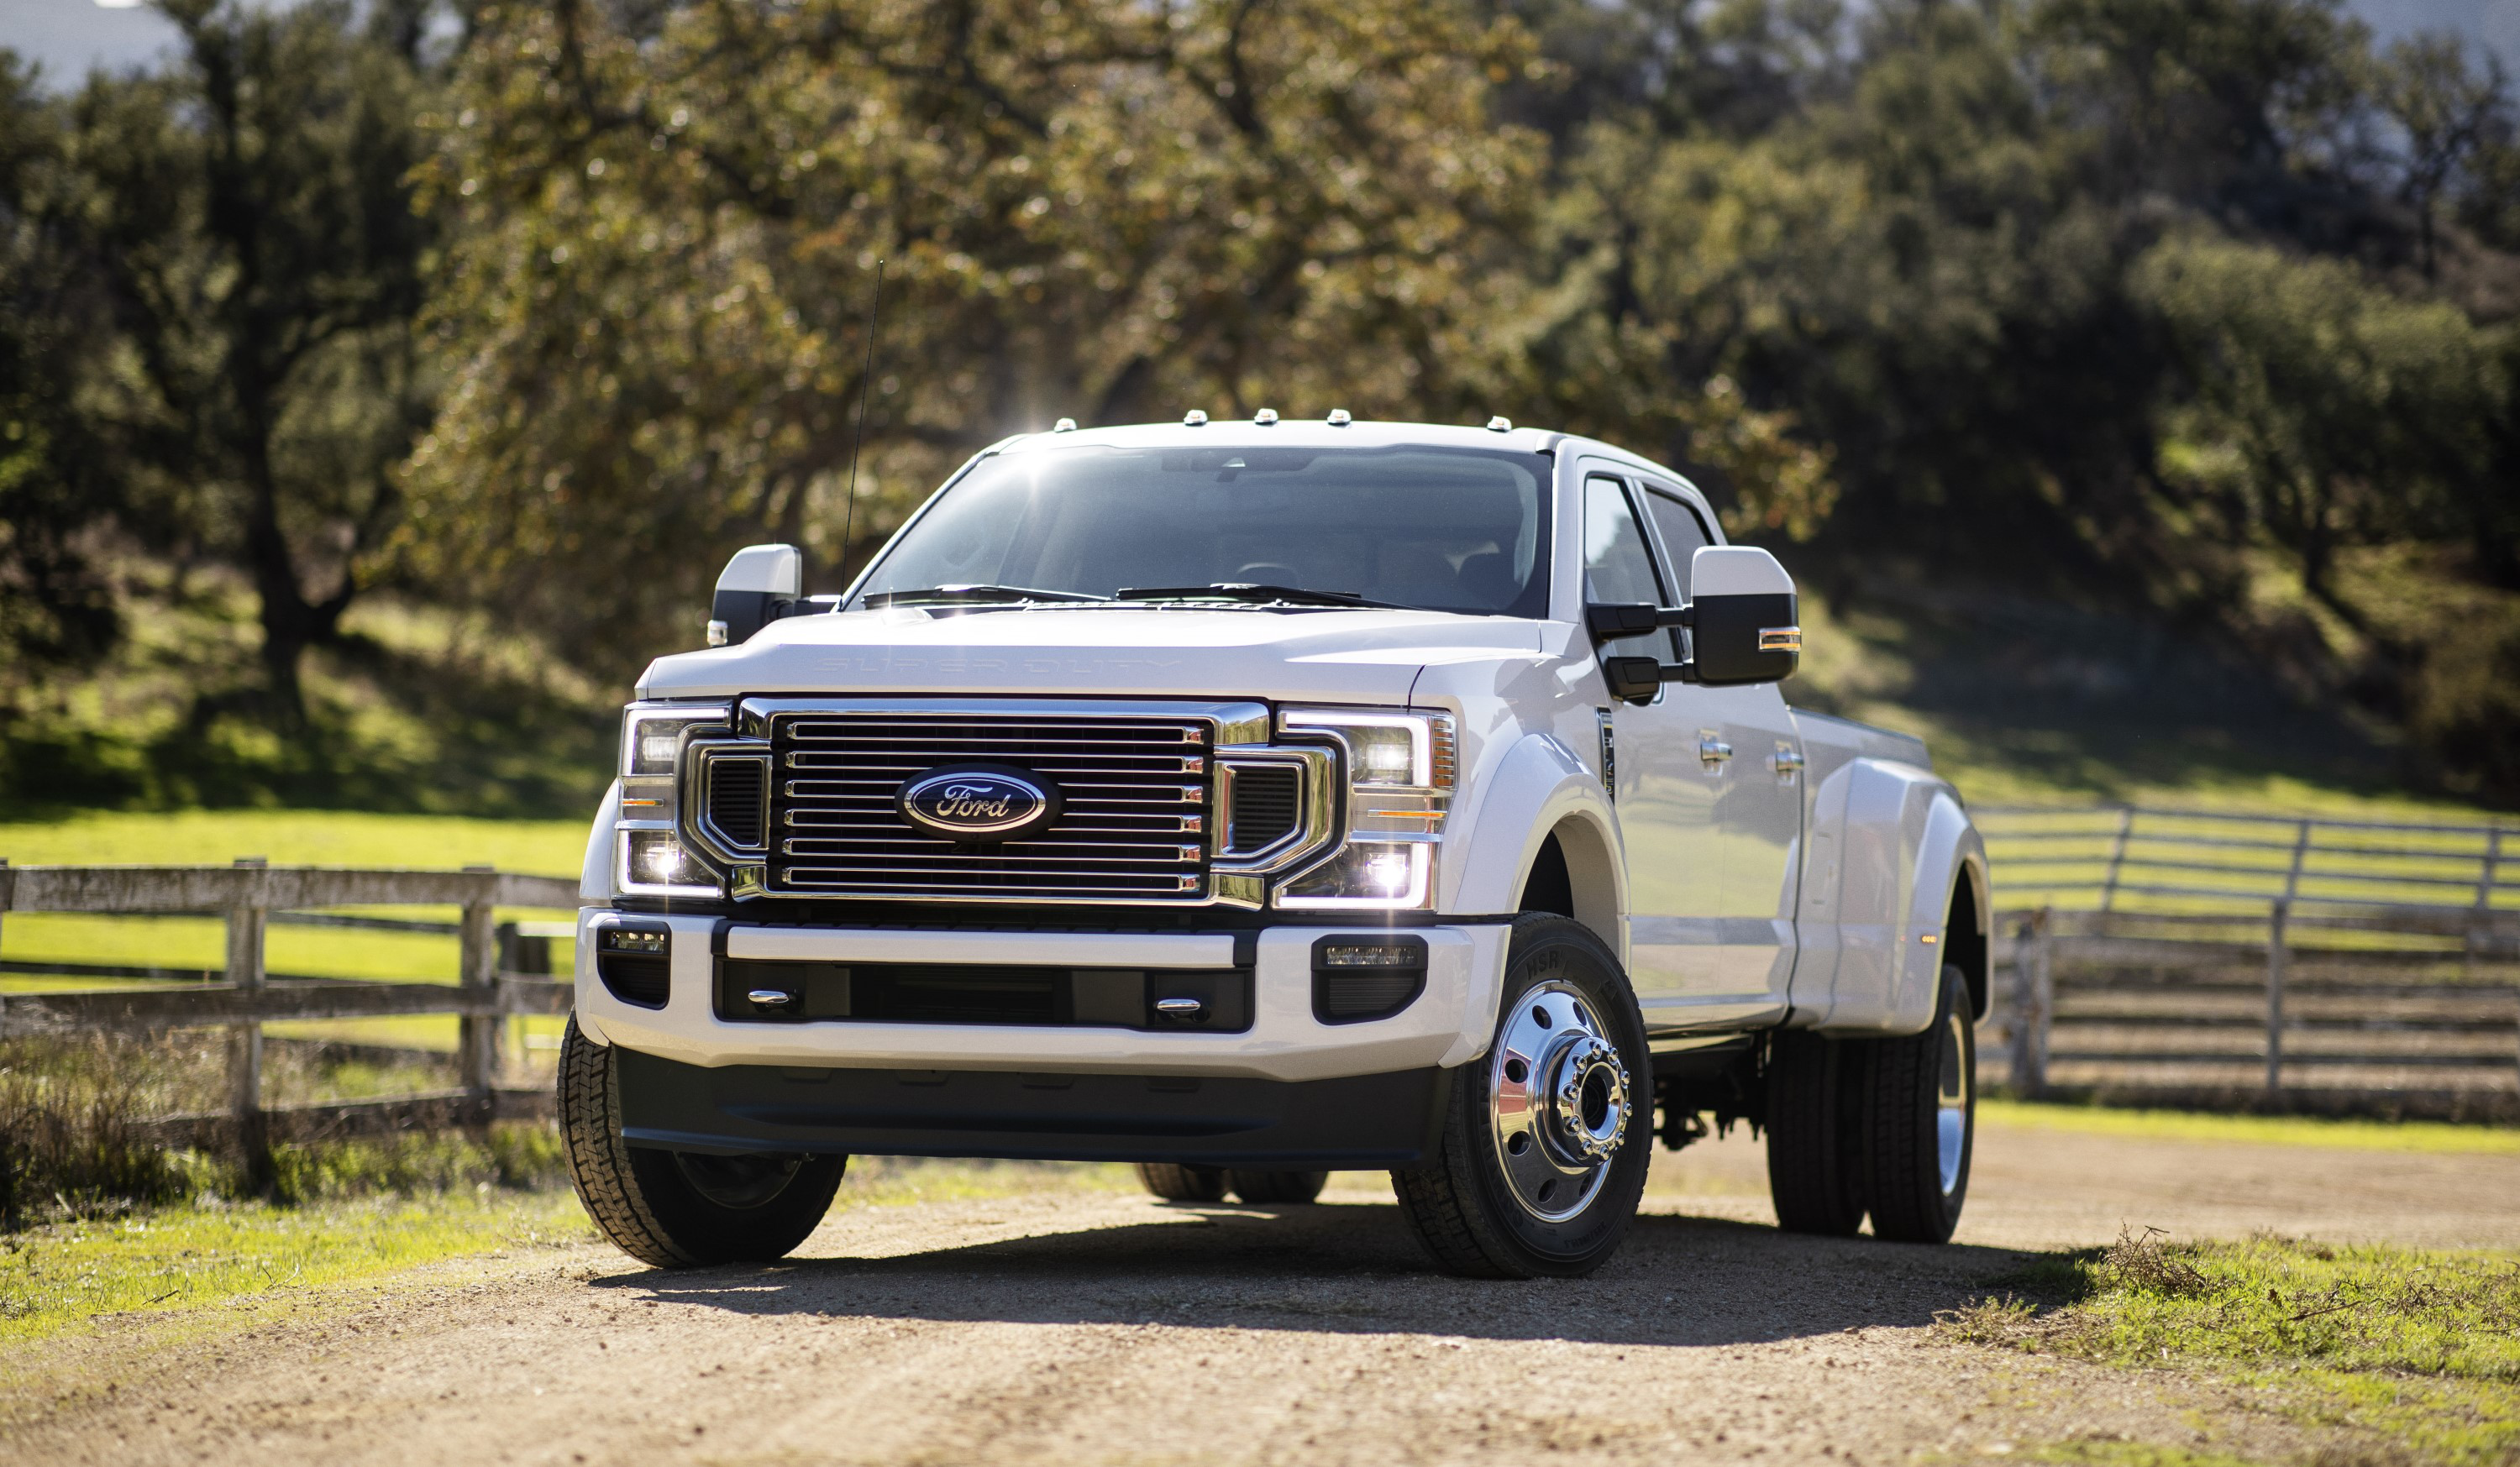 Ford introduces new Super Duty trucks with gas V8 option | Equipment World